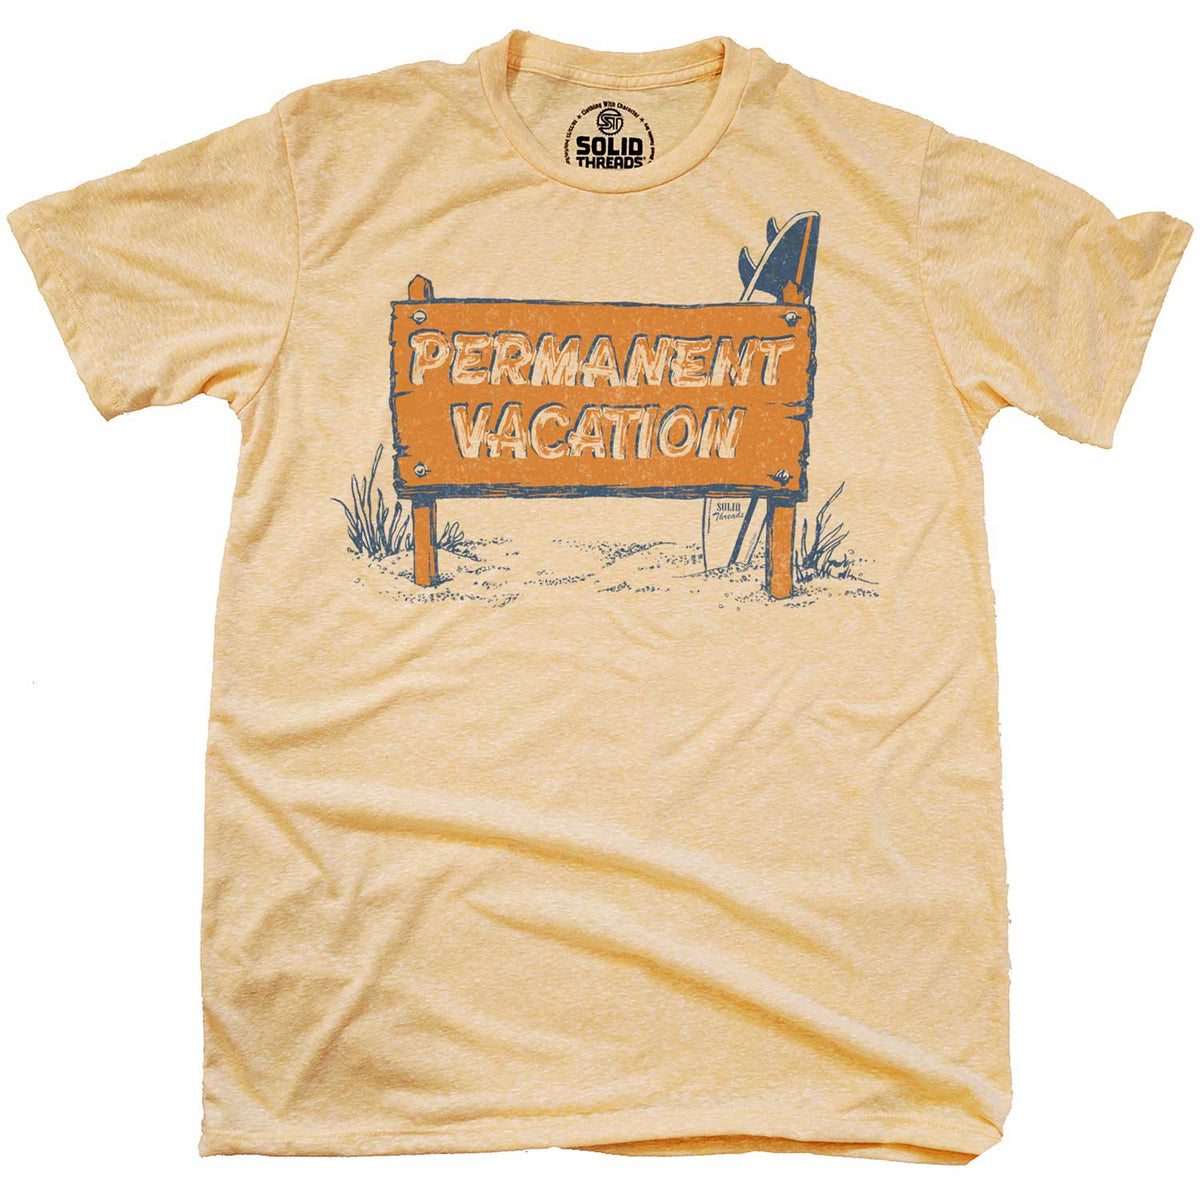 Men&#39;s Permanent Vacation Vintage Graphic T-Shirt | Funny Beach Tee | Solid Threads